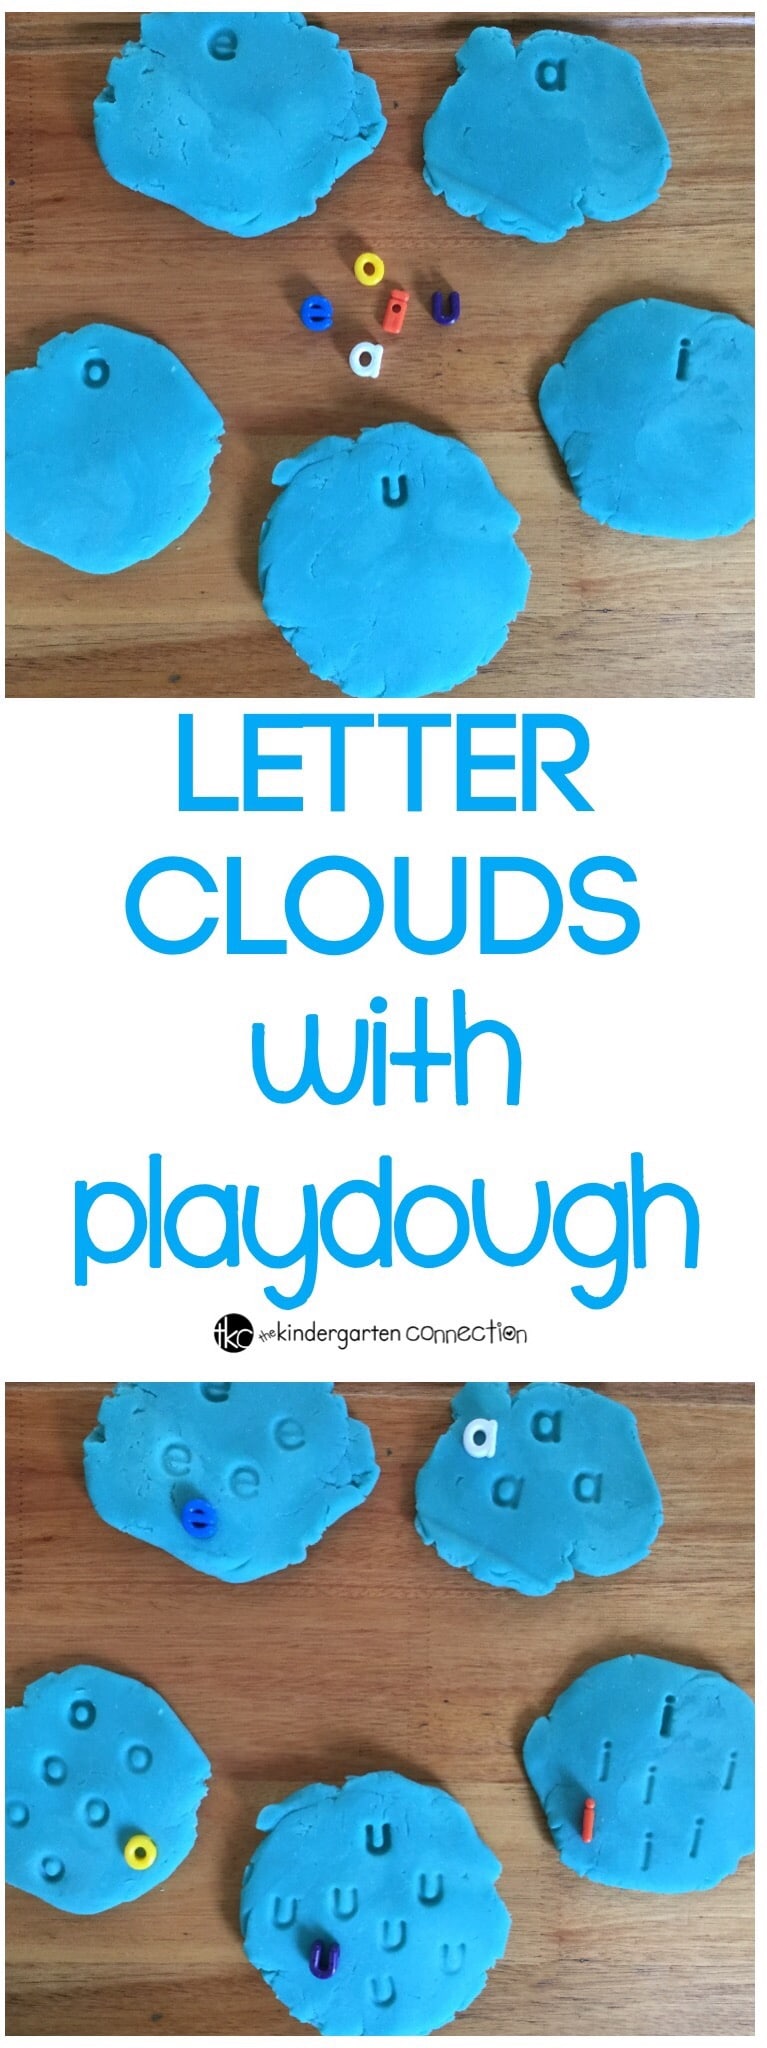 Playdough with letter beads provide all kinds of learning opportunities! We used playdough and letter beads to make clouds, imprinting and sorting vowels.